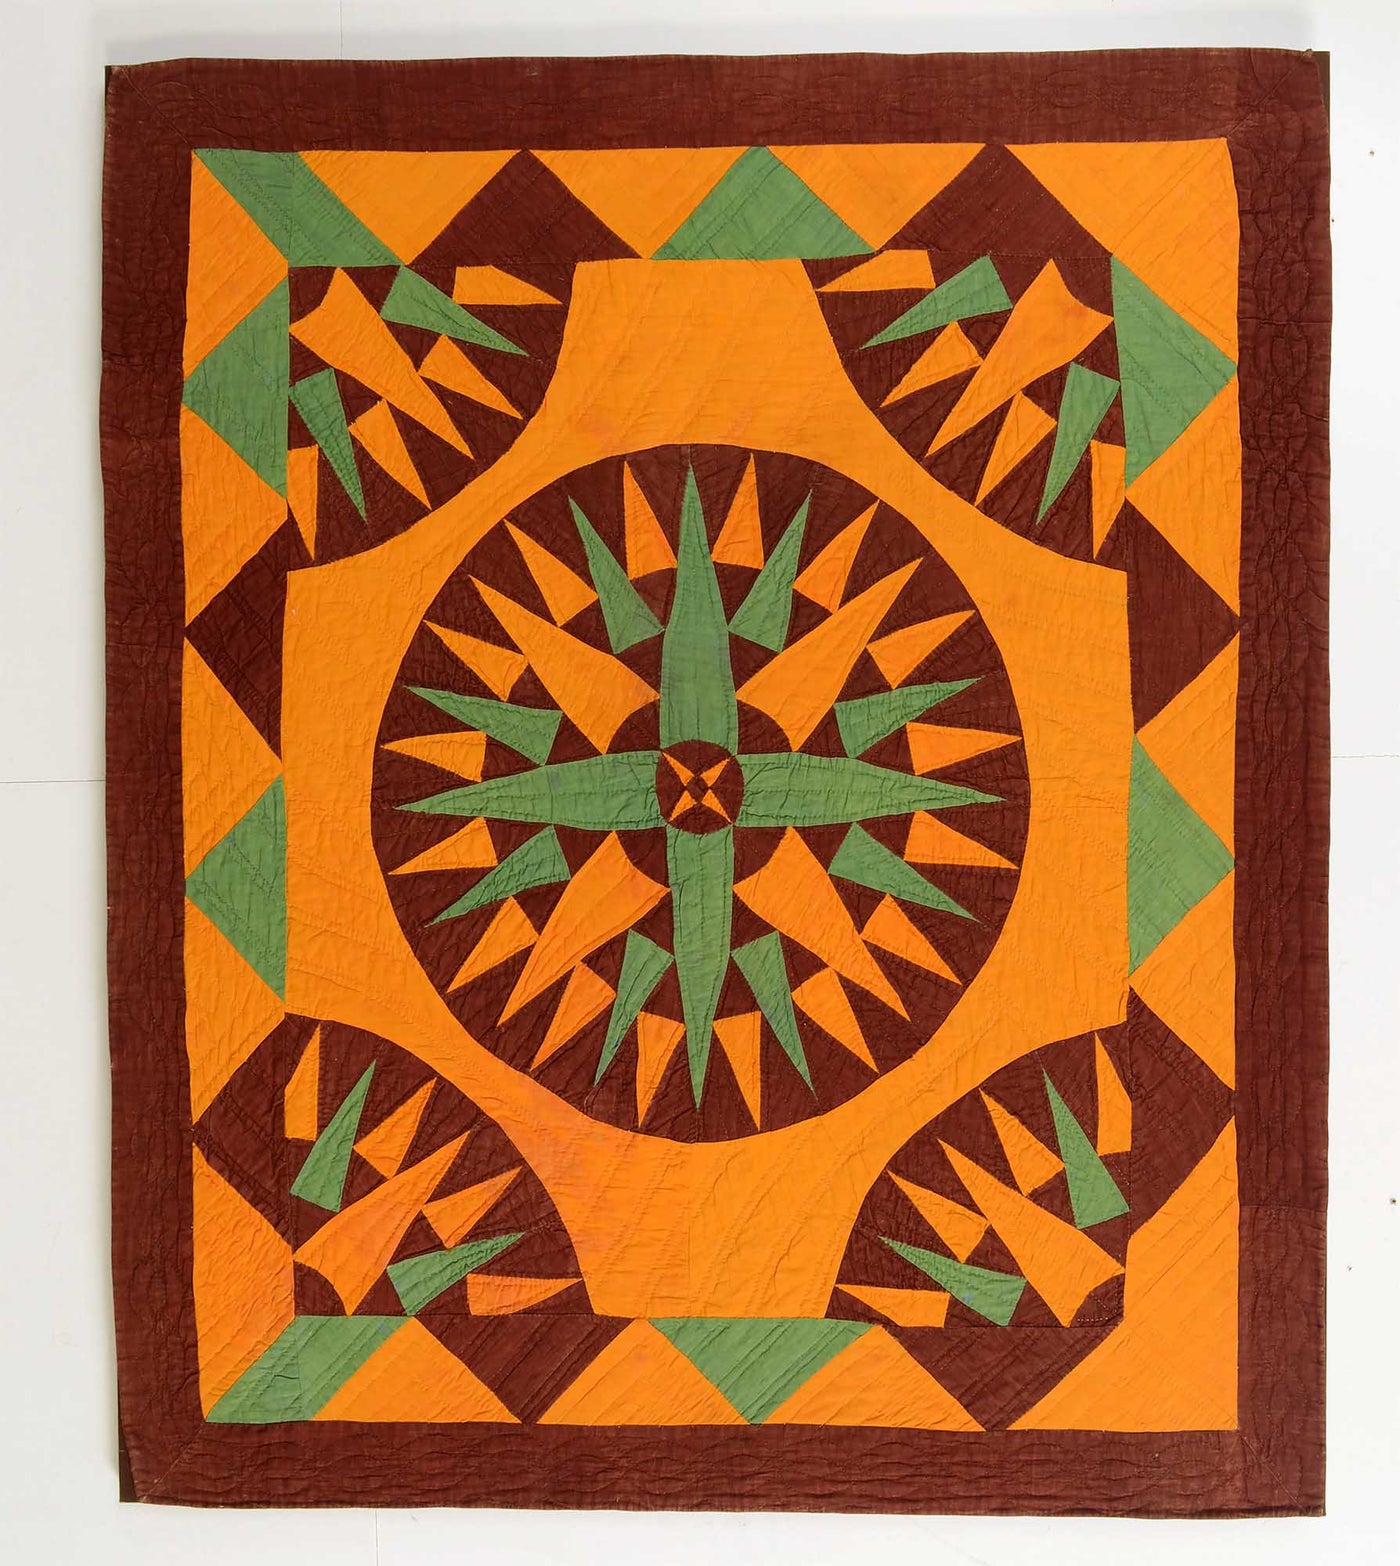 Orange brown and green antique Mariner's Compass Crib Quilt from Pennsylvania with central compass framed with quarter compasses and a triangle border.